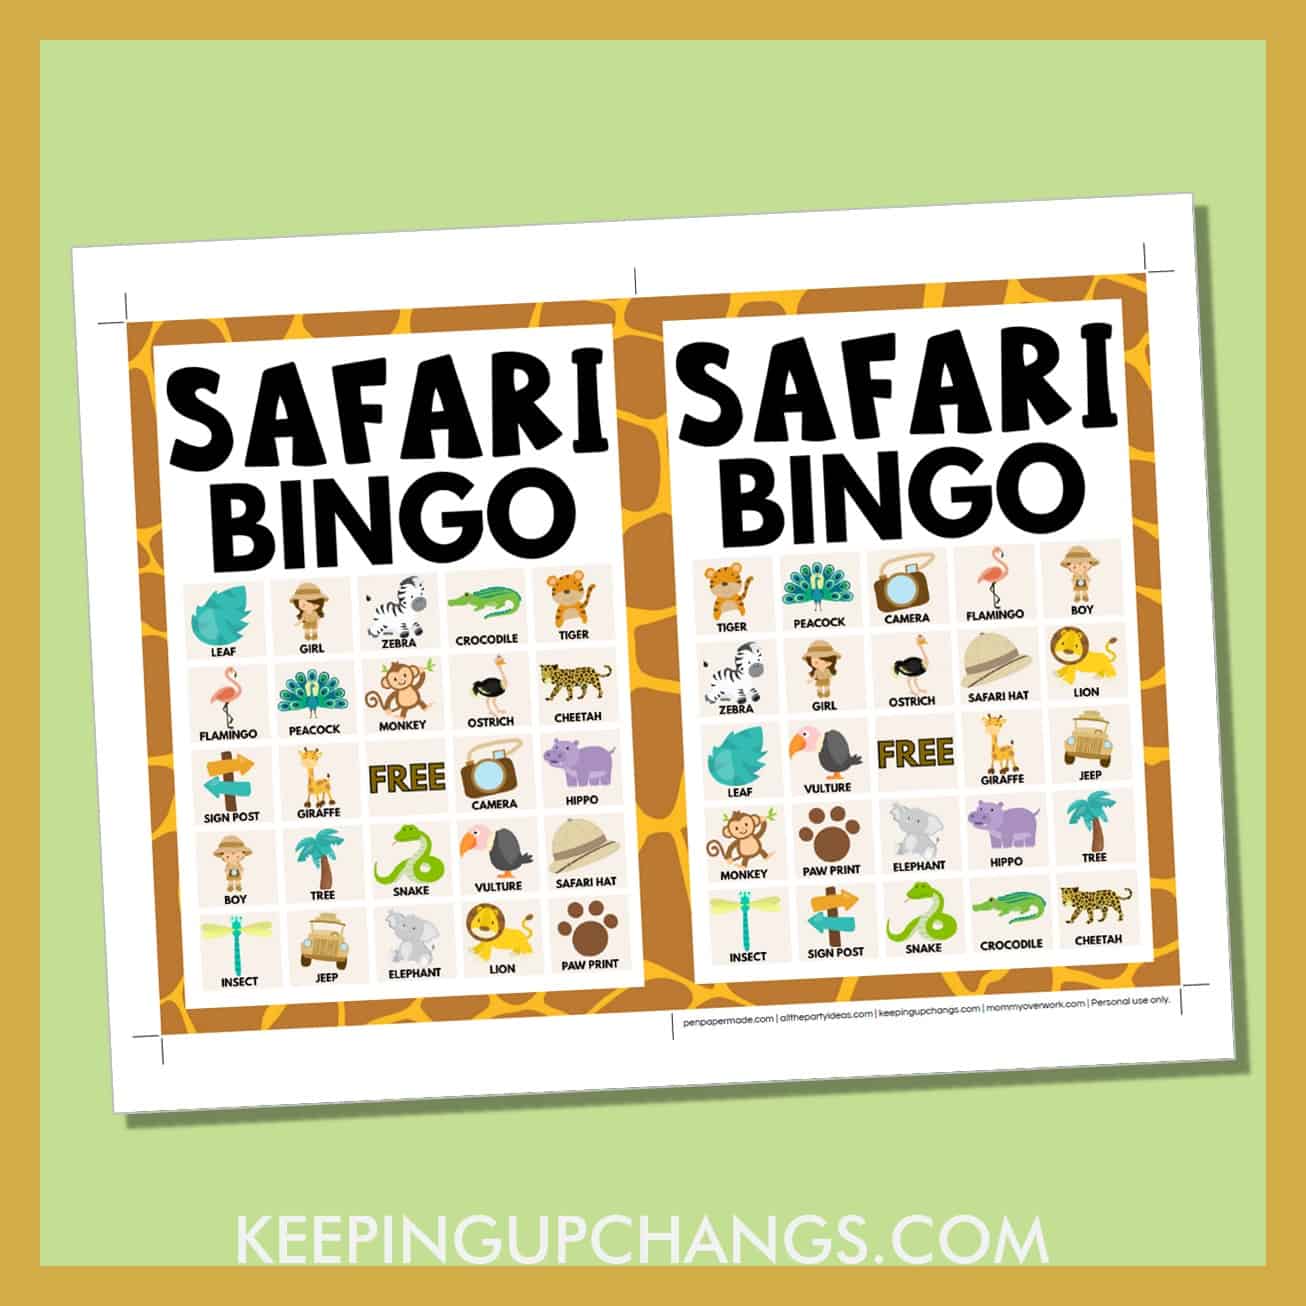 free safari bingo card 5x5 5x7 game boards with images and text words.